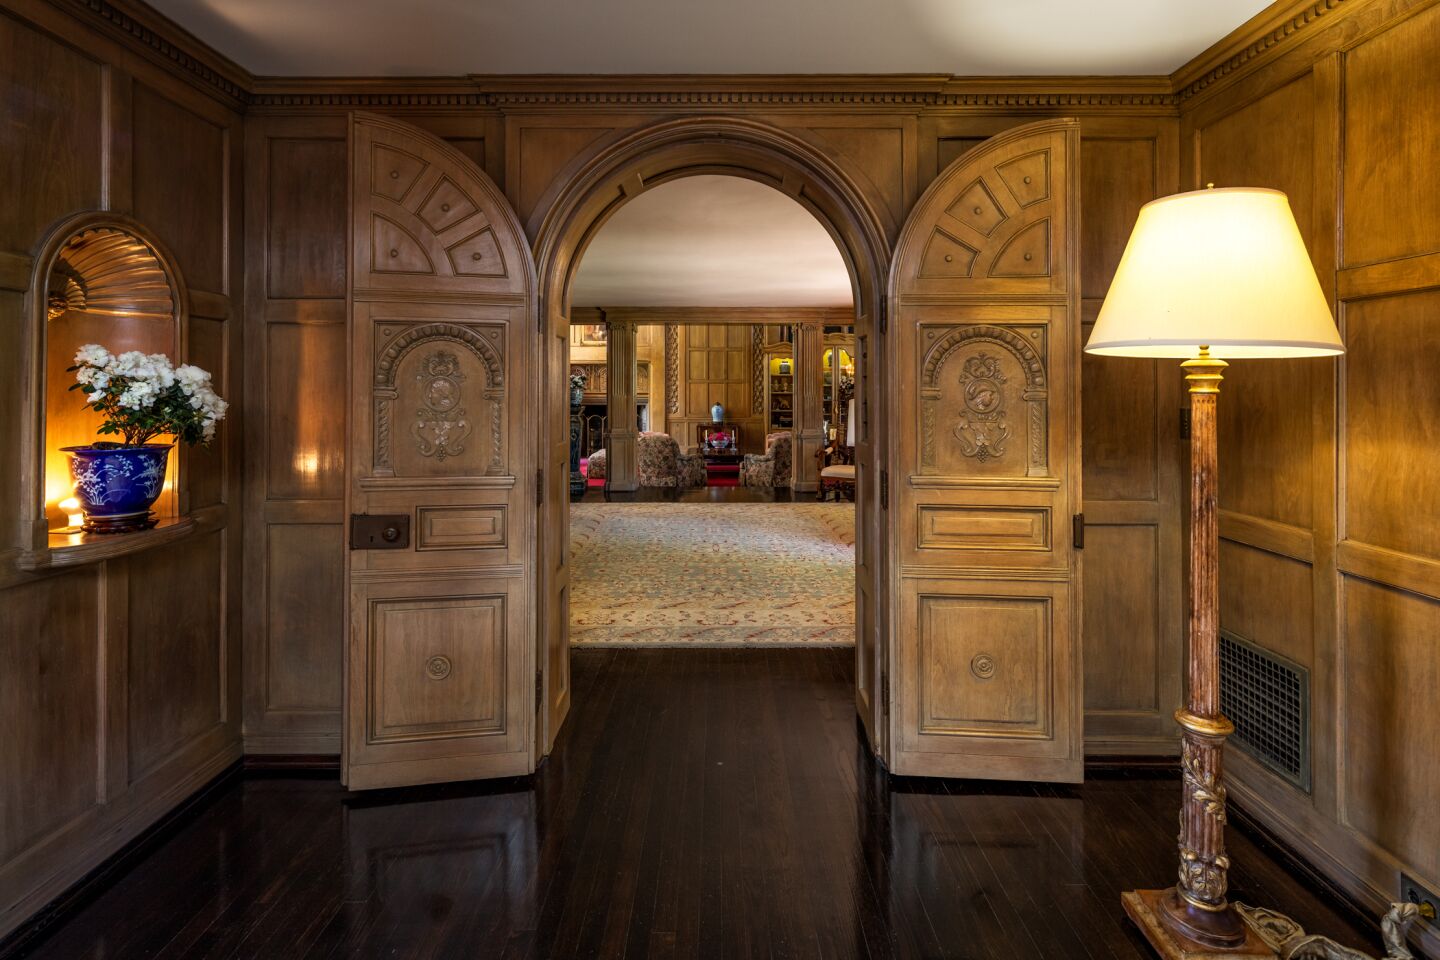 Entry doors leading to the great room.